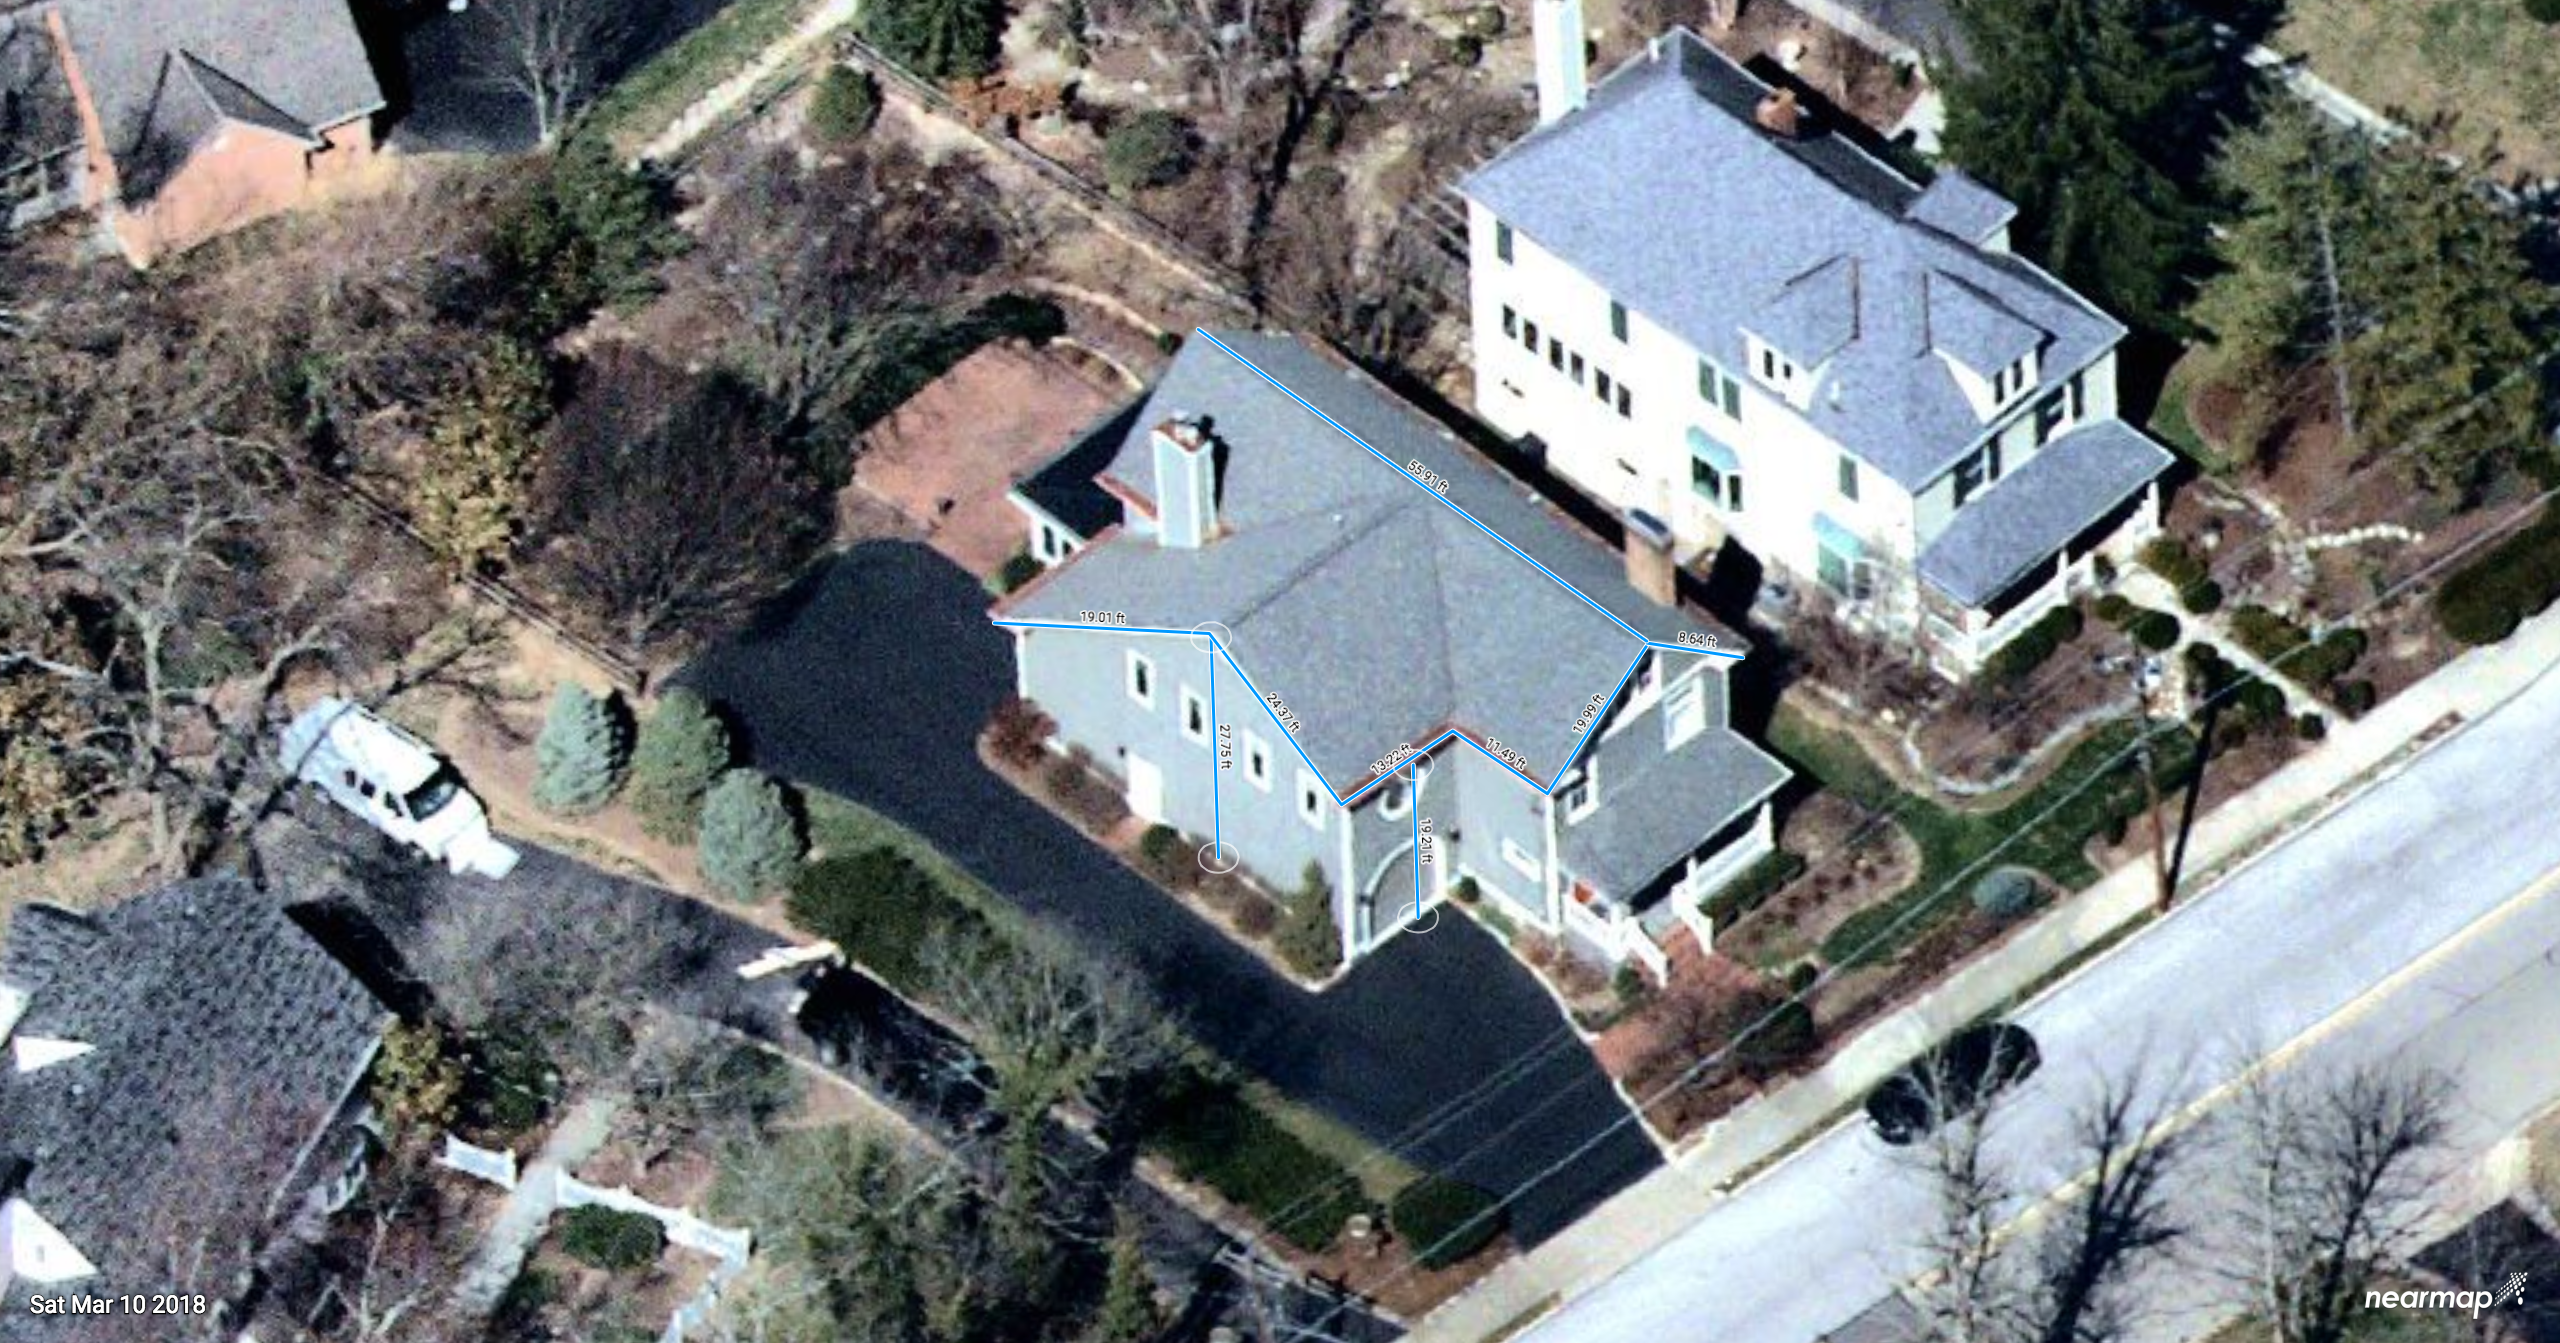 JUL - Technology - Nearmap - How Predictive Analytic Technology Can Grow Your Roofing Business